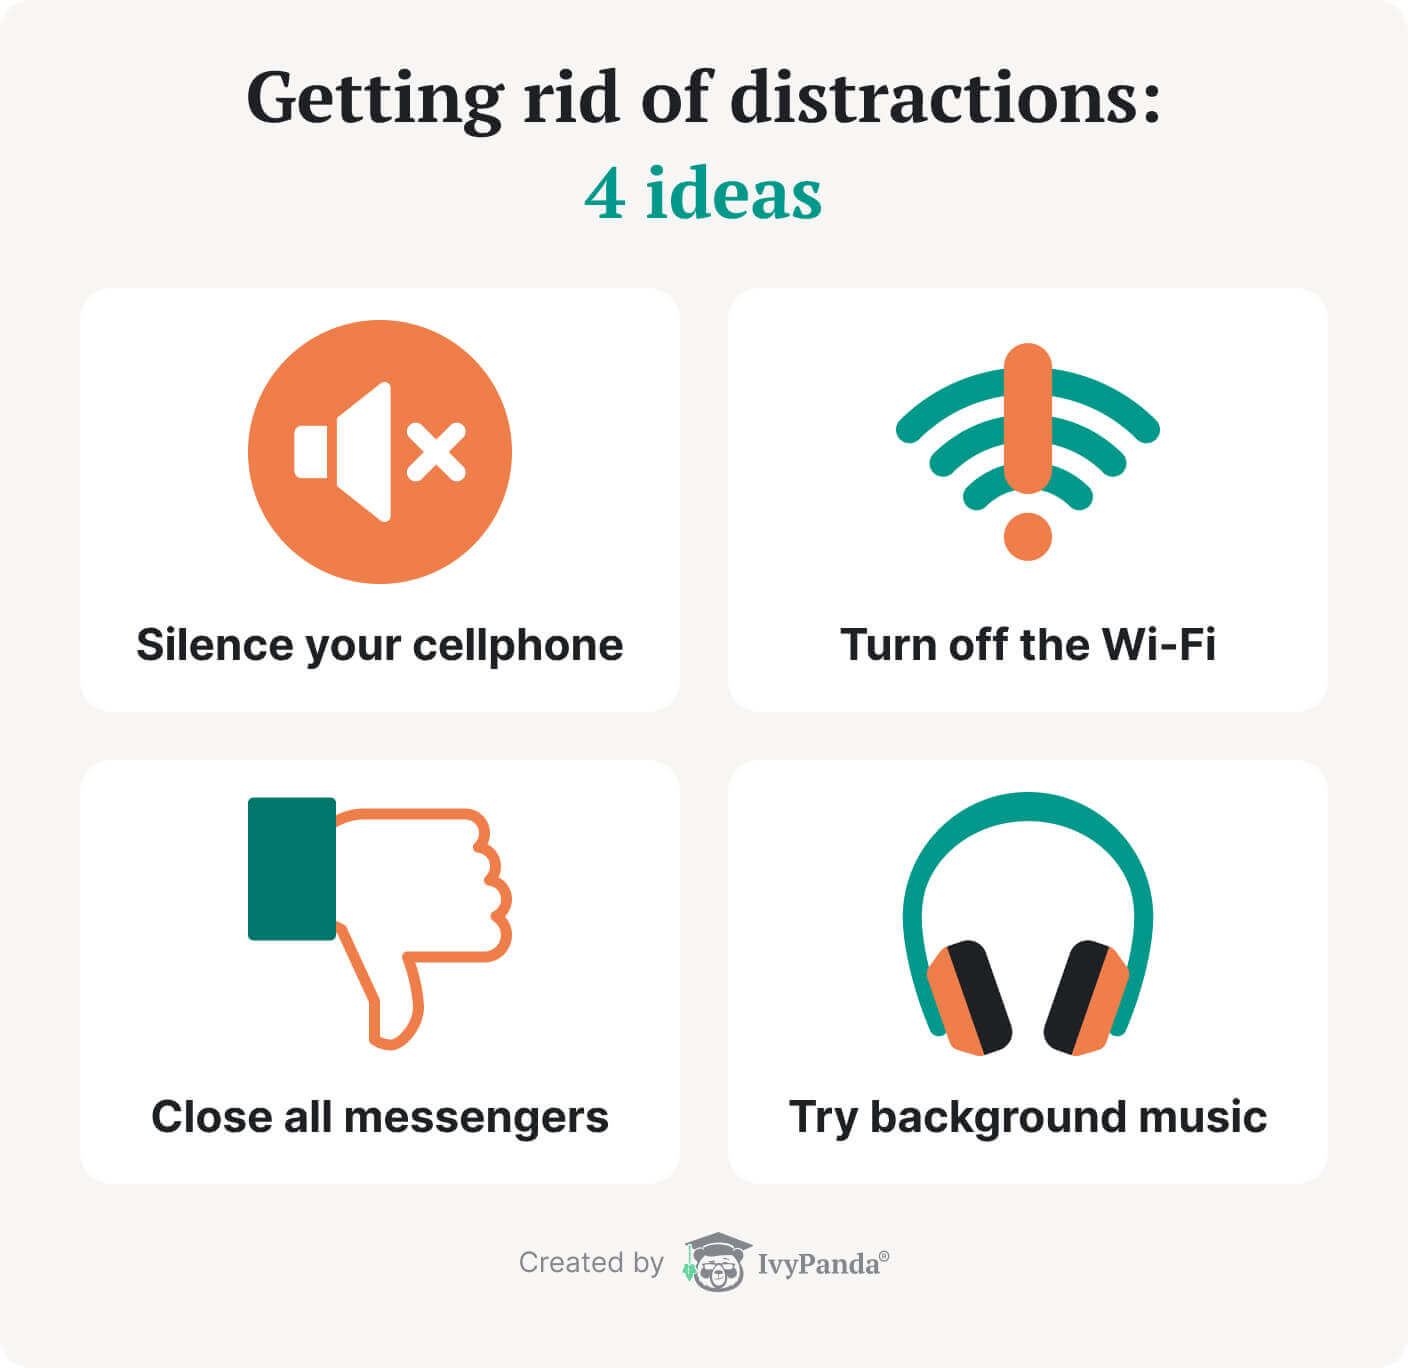 The picture contains 4 ideas on how to get rid of distractions while studying.